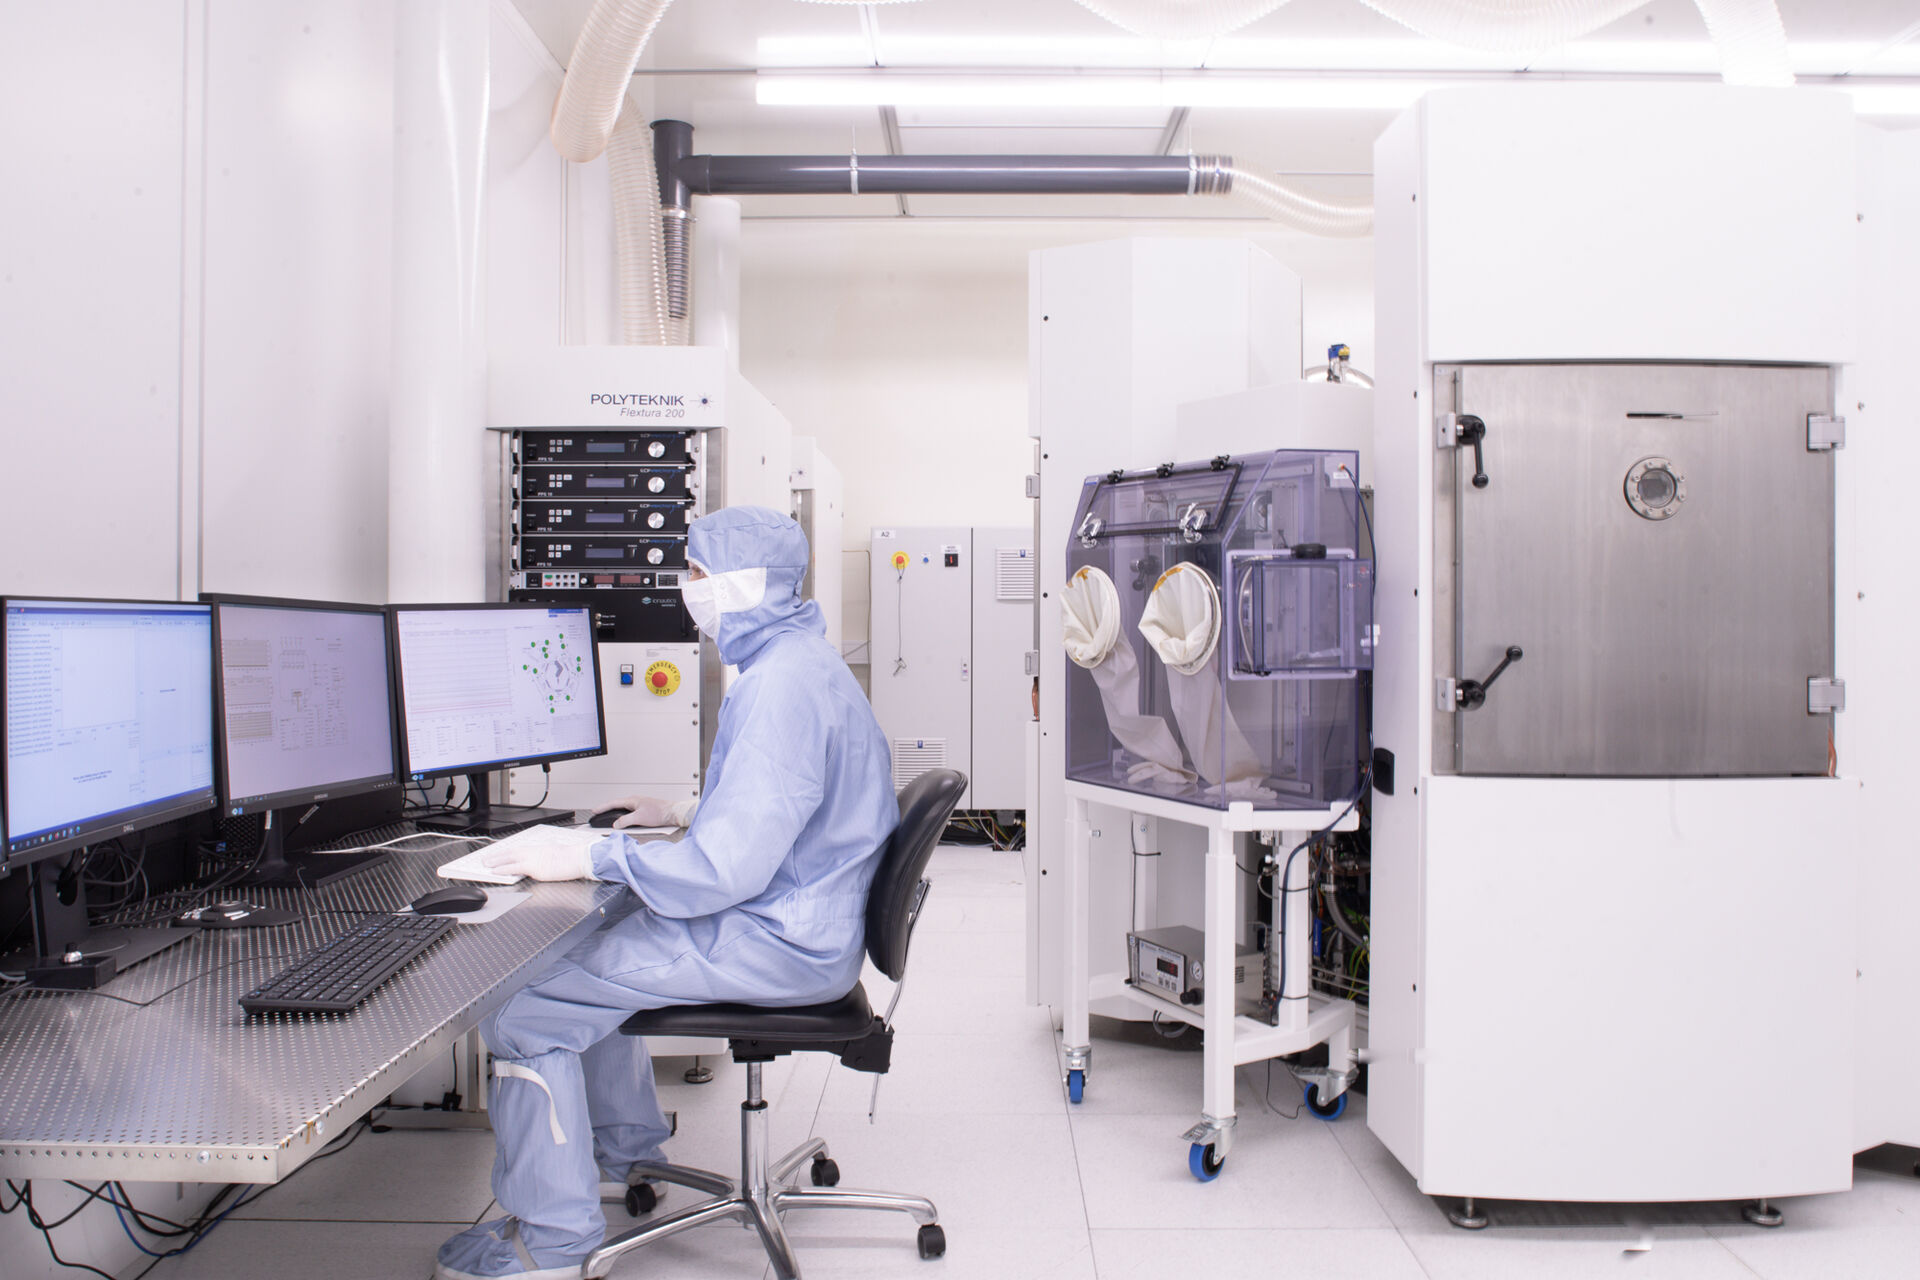 Researcher working inside the cleanroom